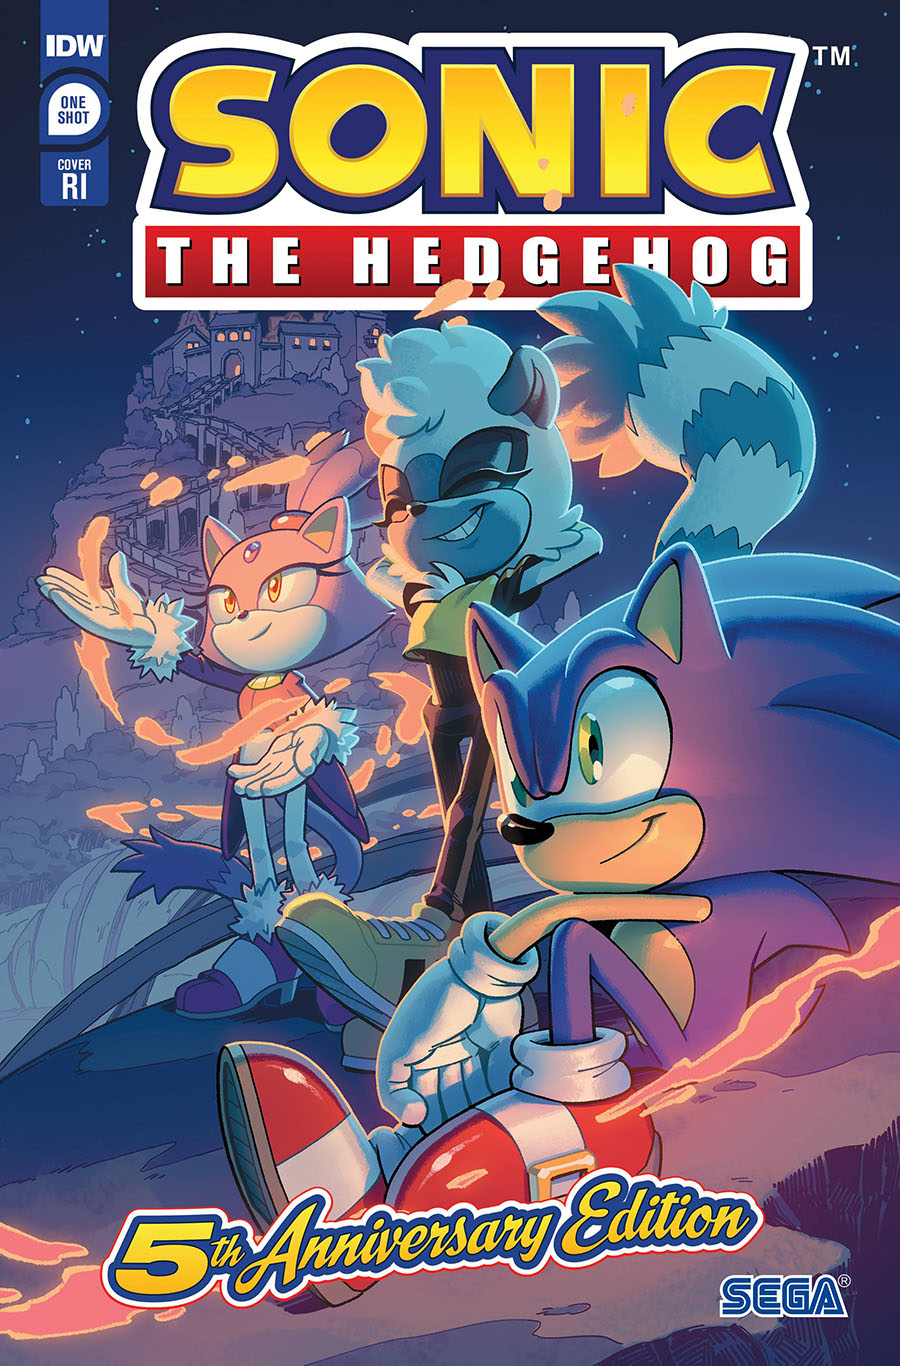 Sonic The Hedgehog Vol 3 #1 5th Anniversary Edition Cover F Incentive Evan Stanley Variant Cover